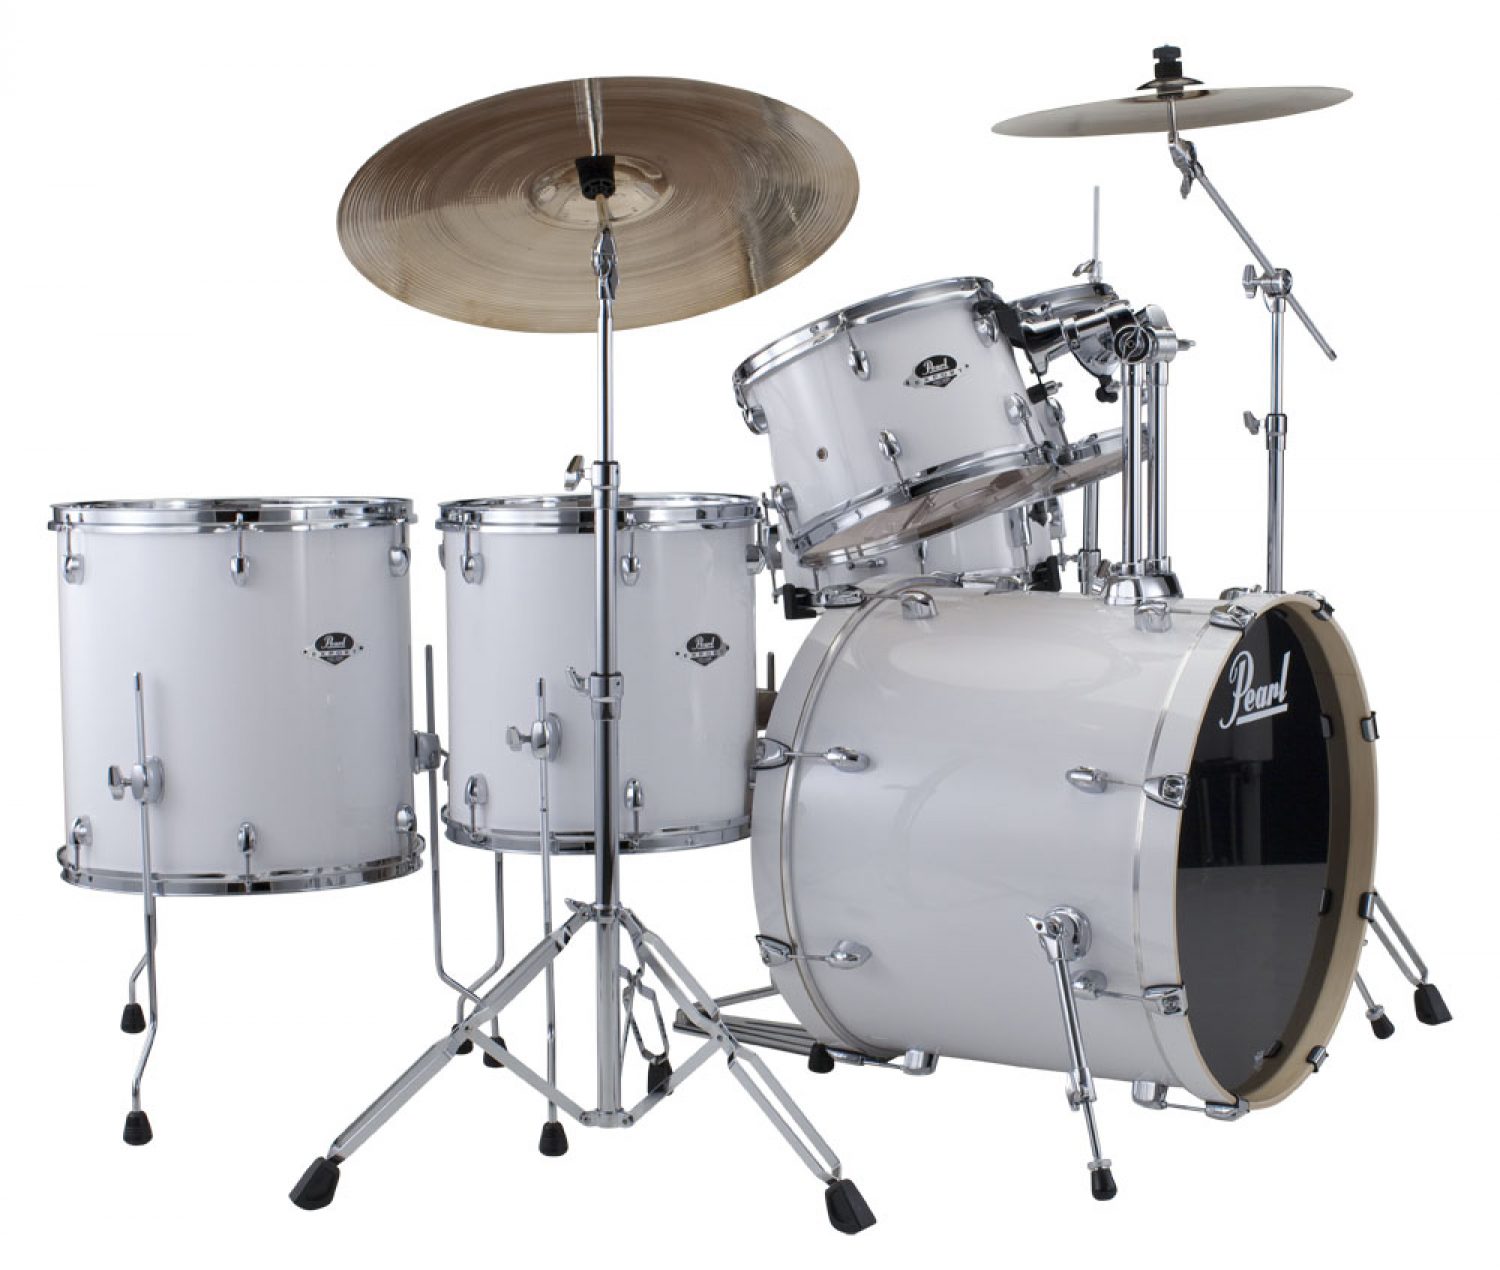 The Worlds Best Selling Drum Kit Returns – Reintroducing The Pearl Export